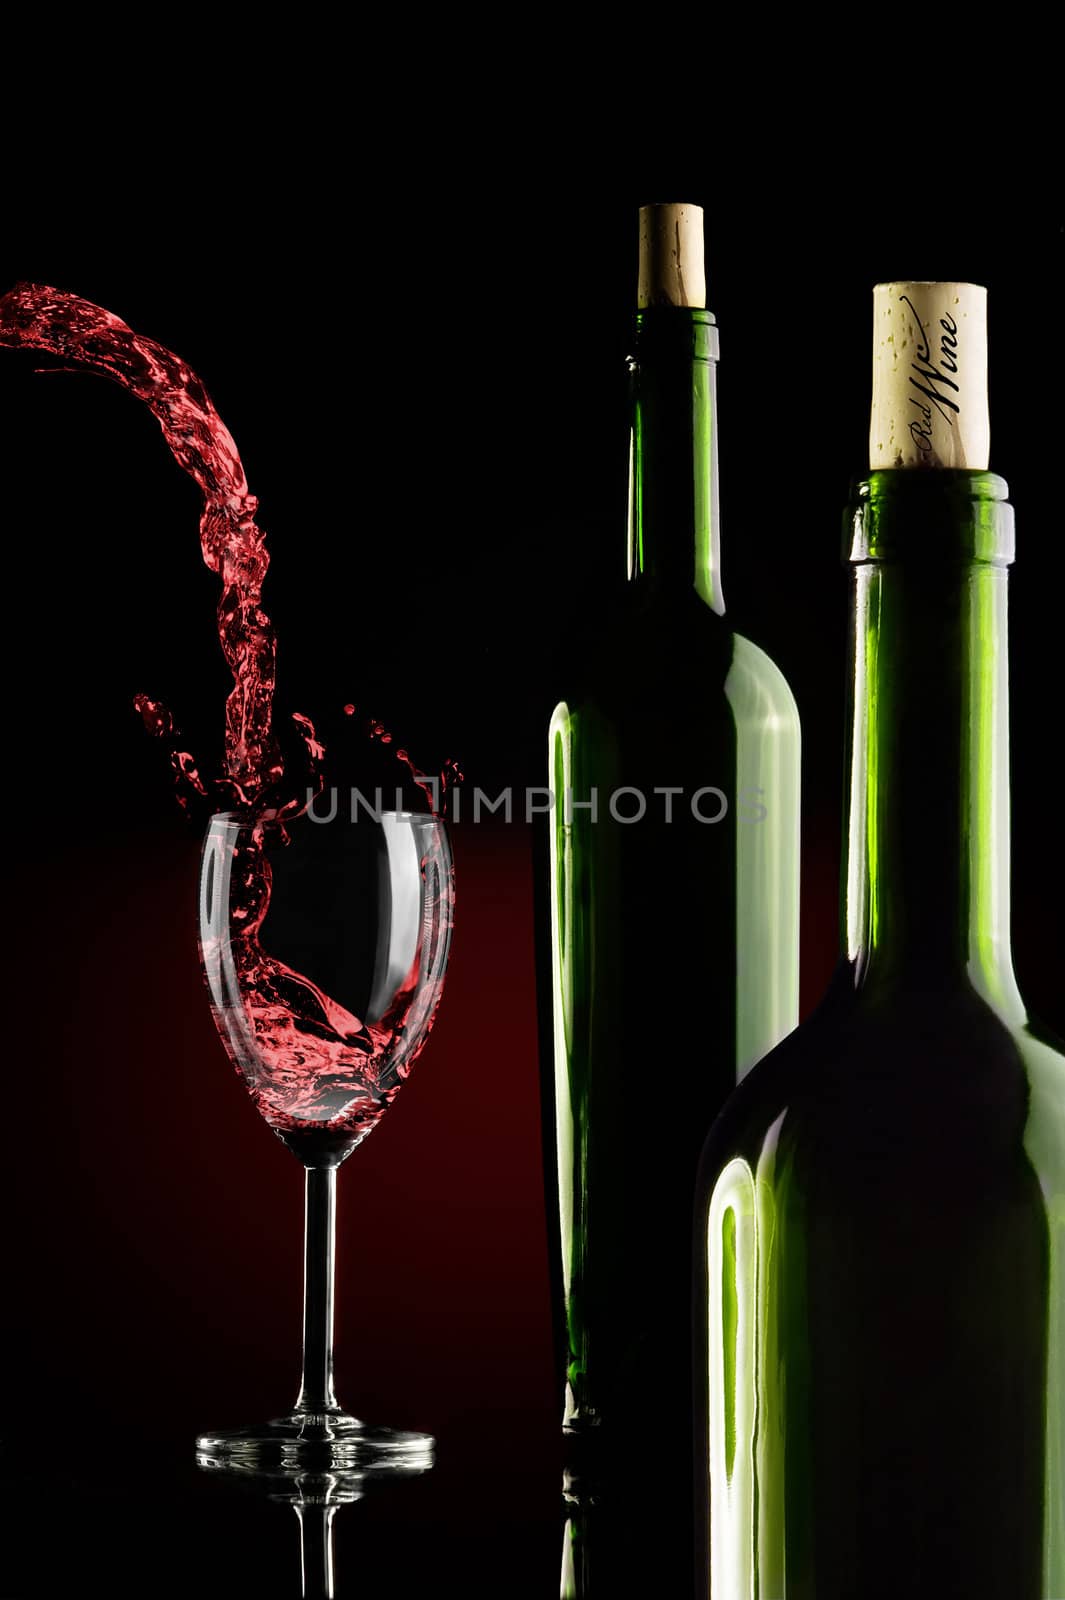 two bottles and a glass of wine over gradient backround